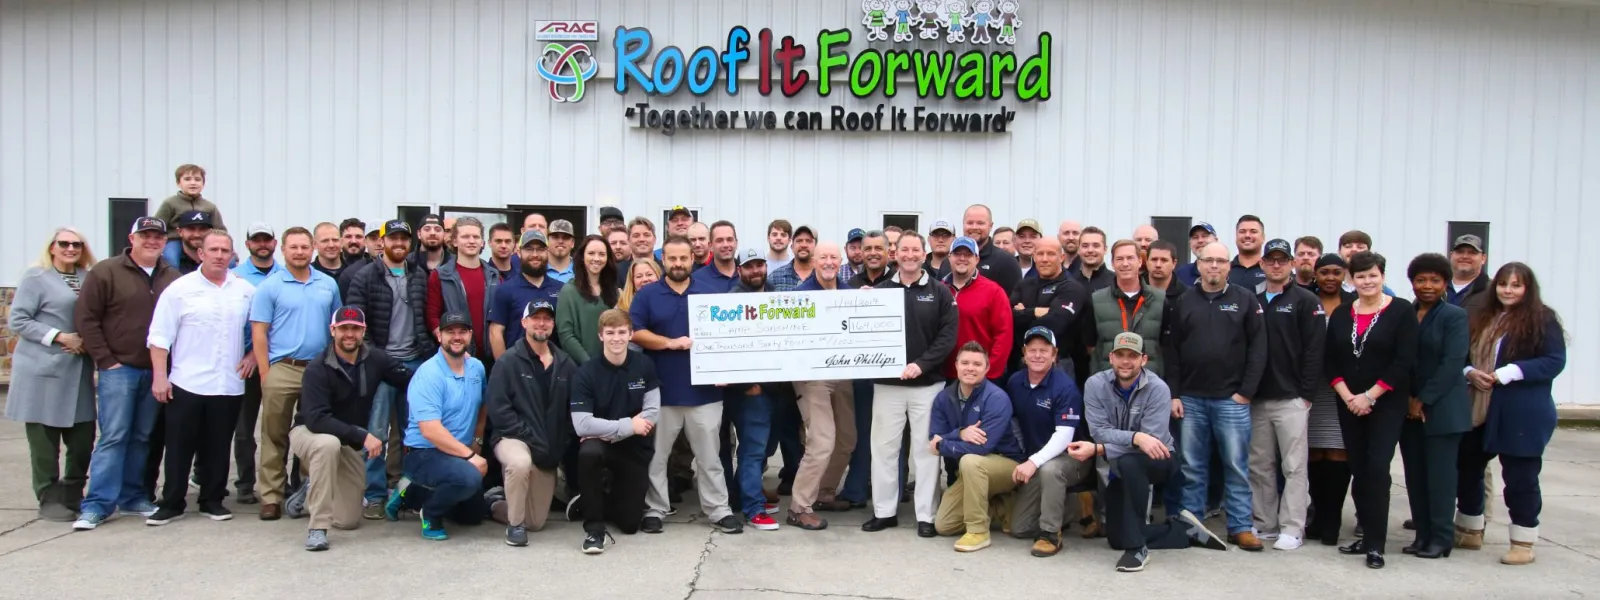 Thank You from ARAC Roof It Forward.